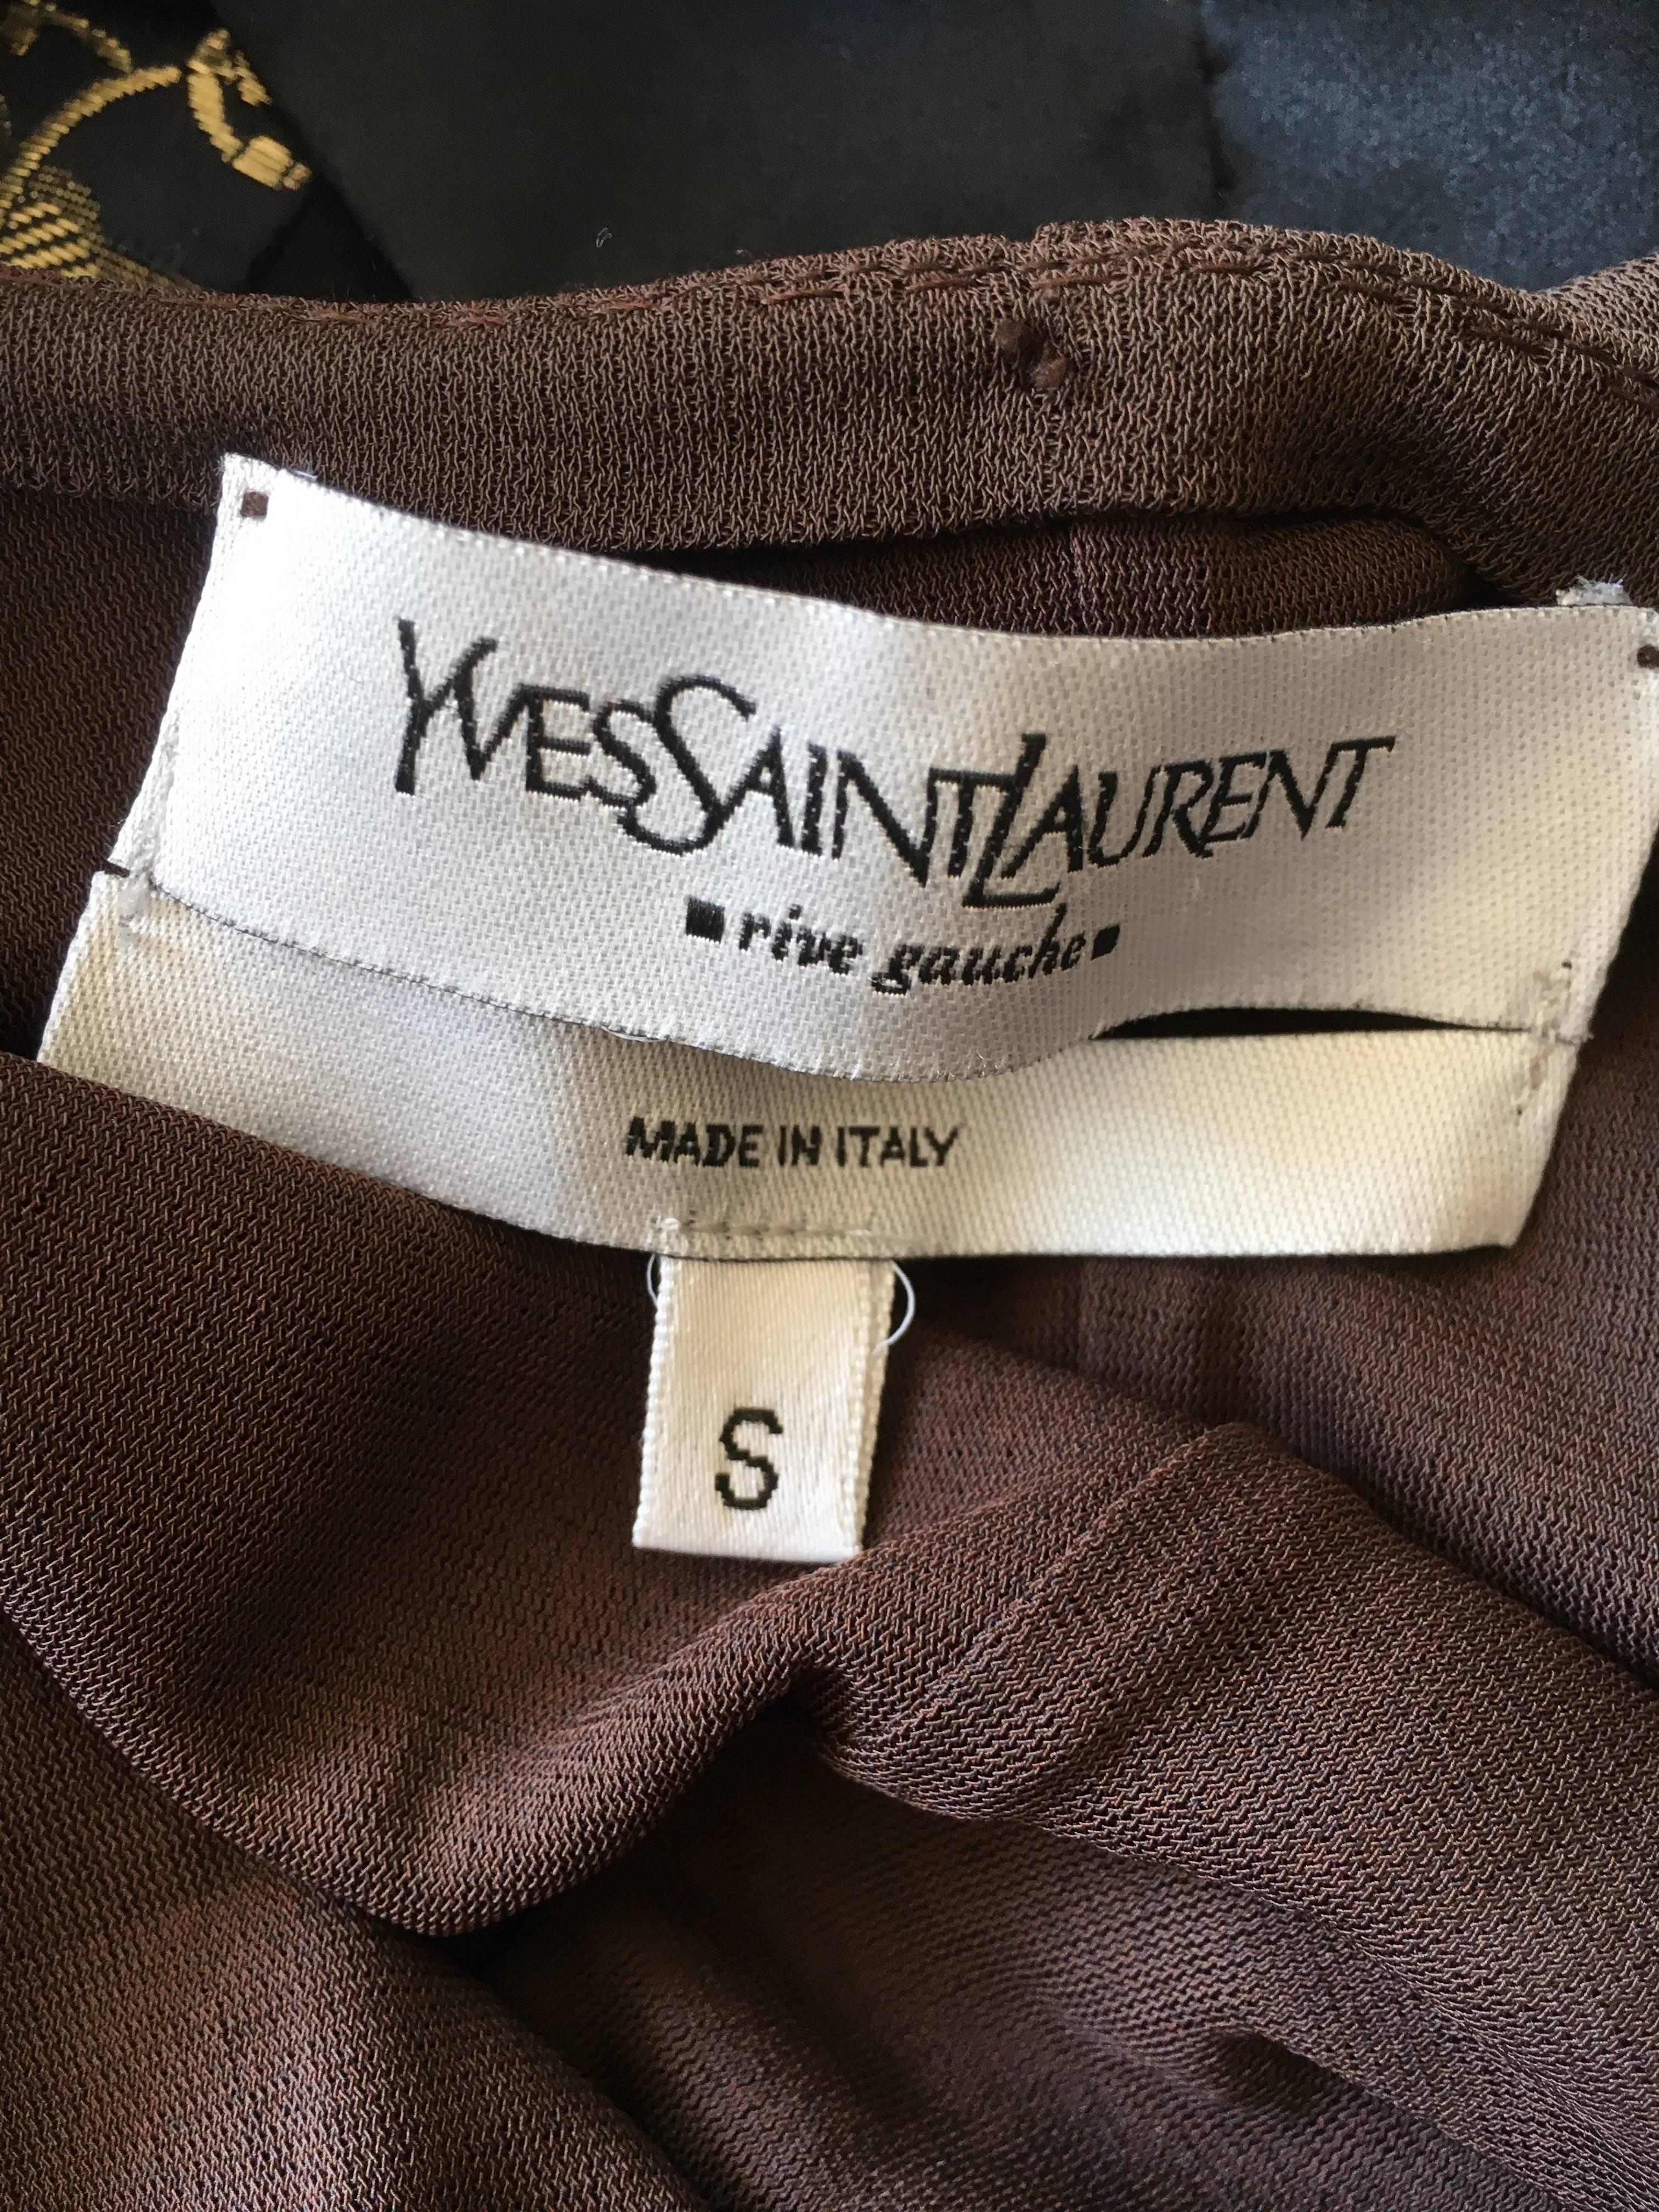 Yves Saint Laurent  by Tom Ford Sheer Brown Wrap Dress For Sale 2